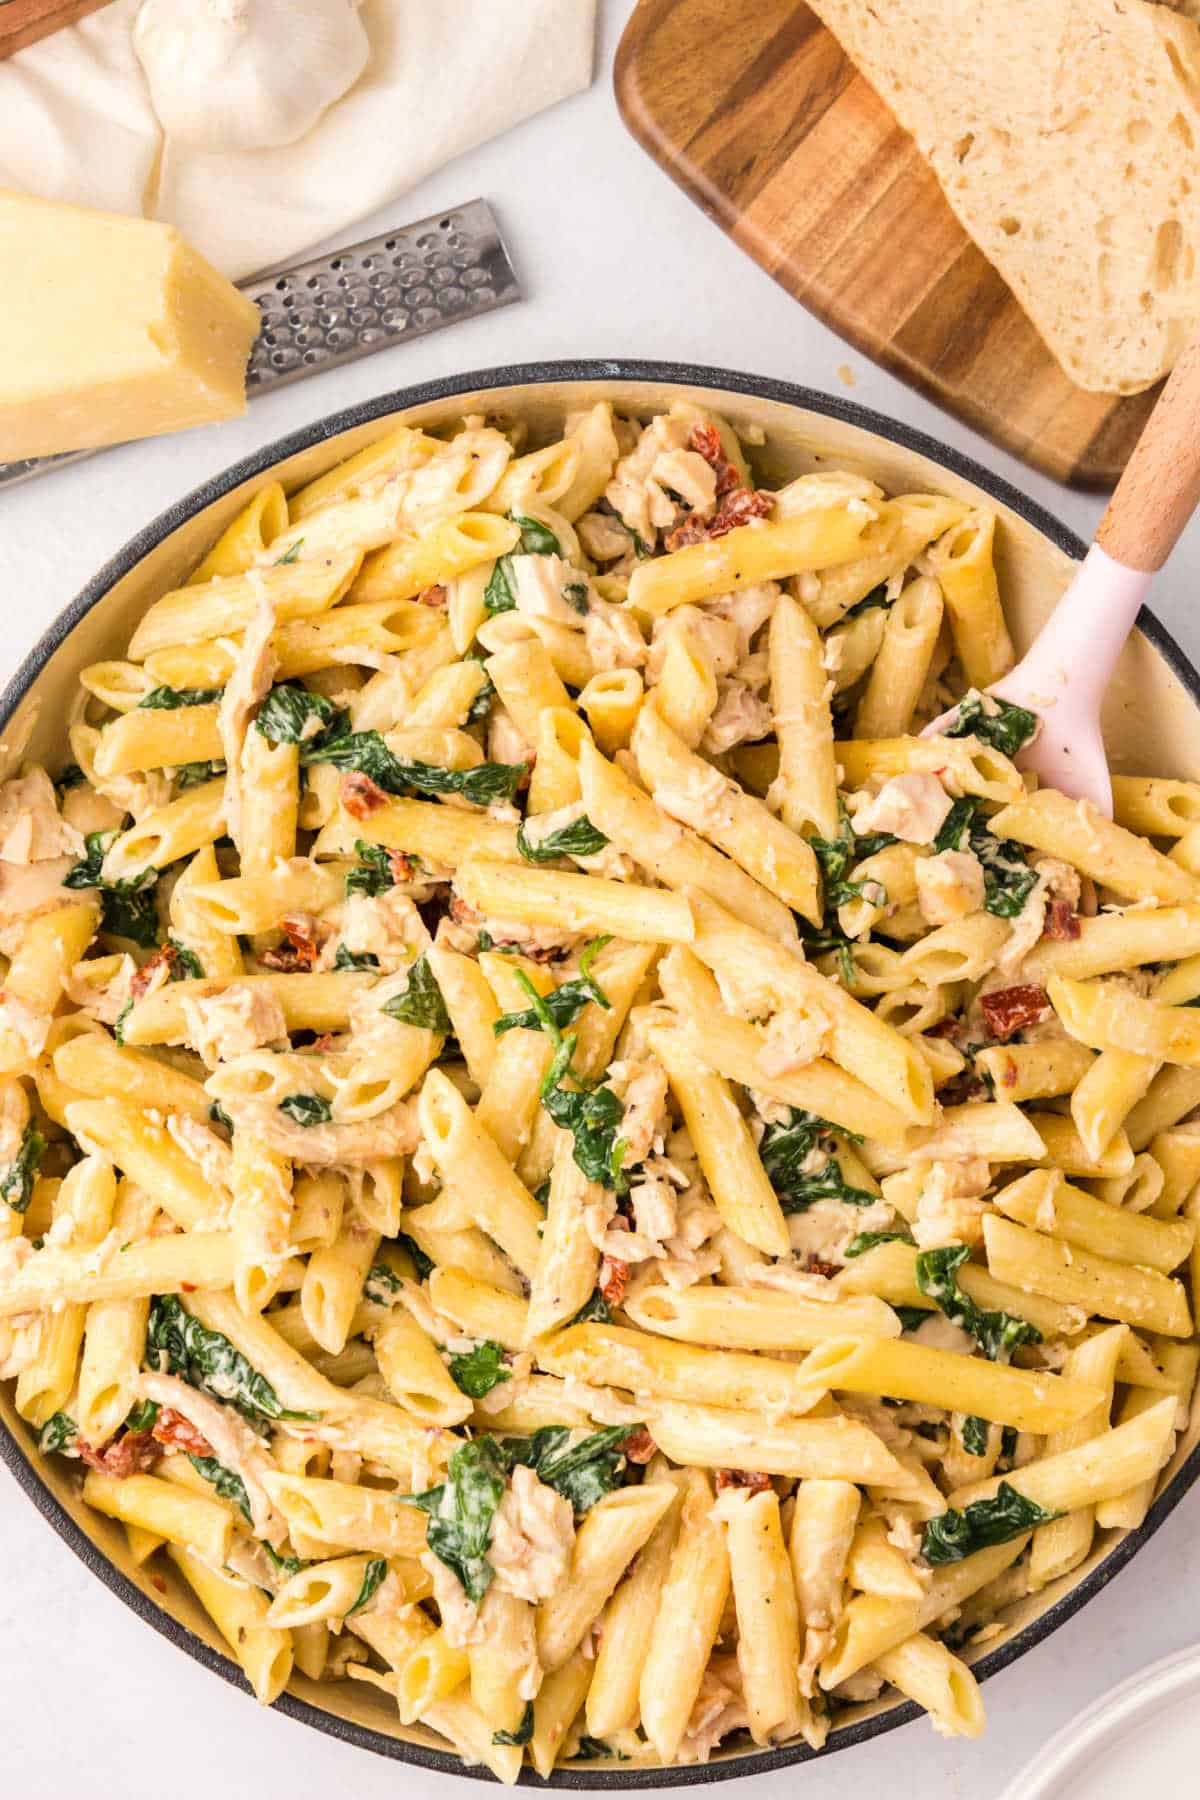 
Chicken and spinach pasta in a pan with a serving spoon.